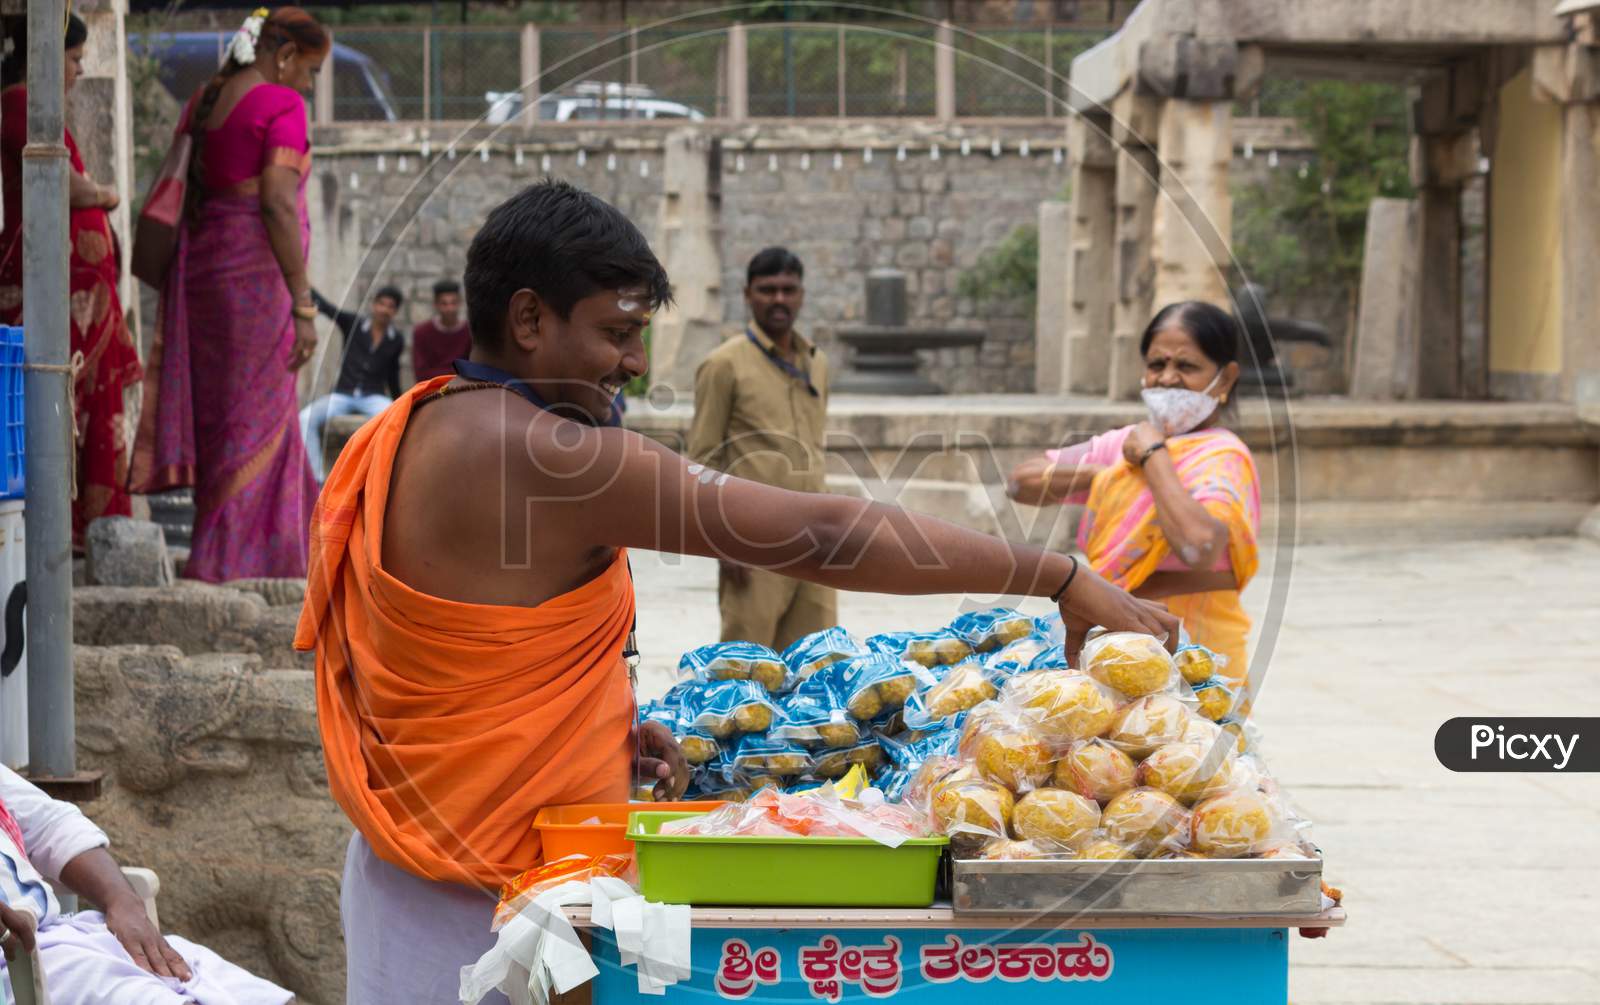 A Hindu Priest is seen selling Sweets and souvenirs for the pilgrims visiting the Shiva temple in Talakadu village near Mysuru in India.